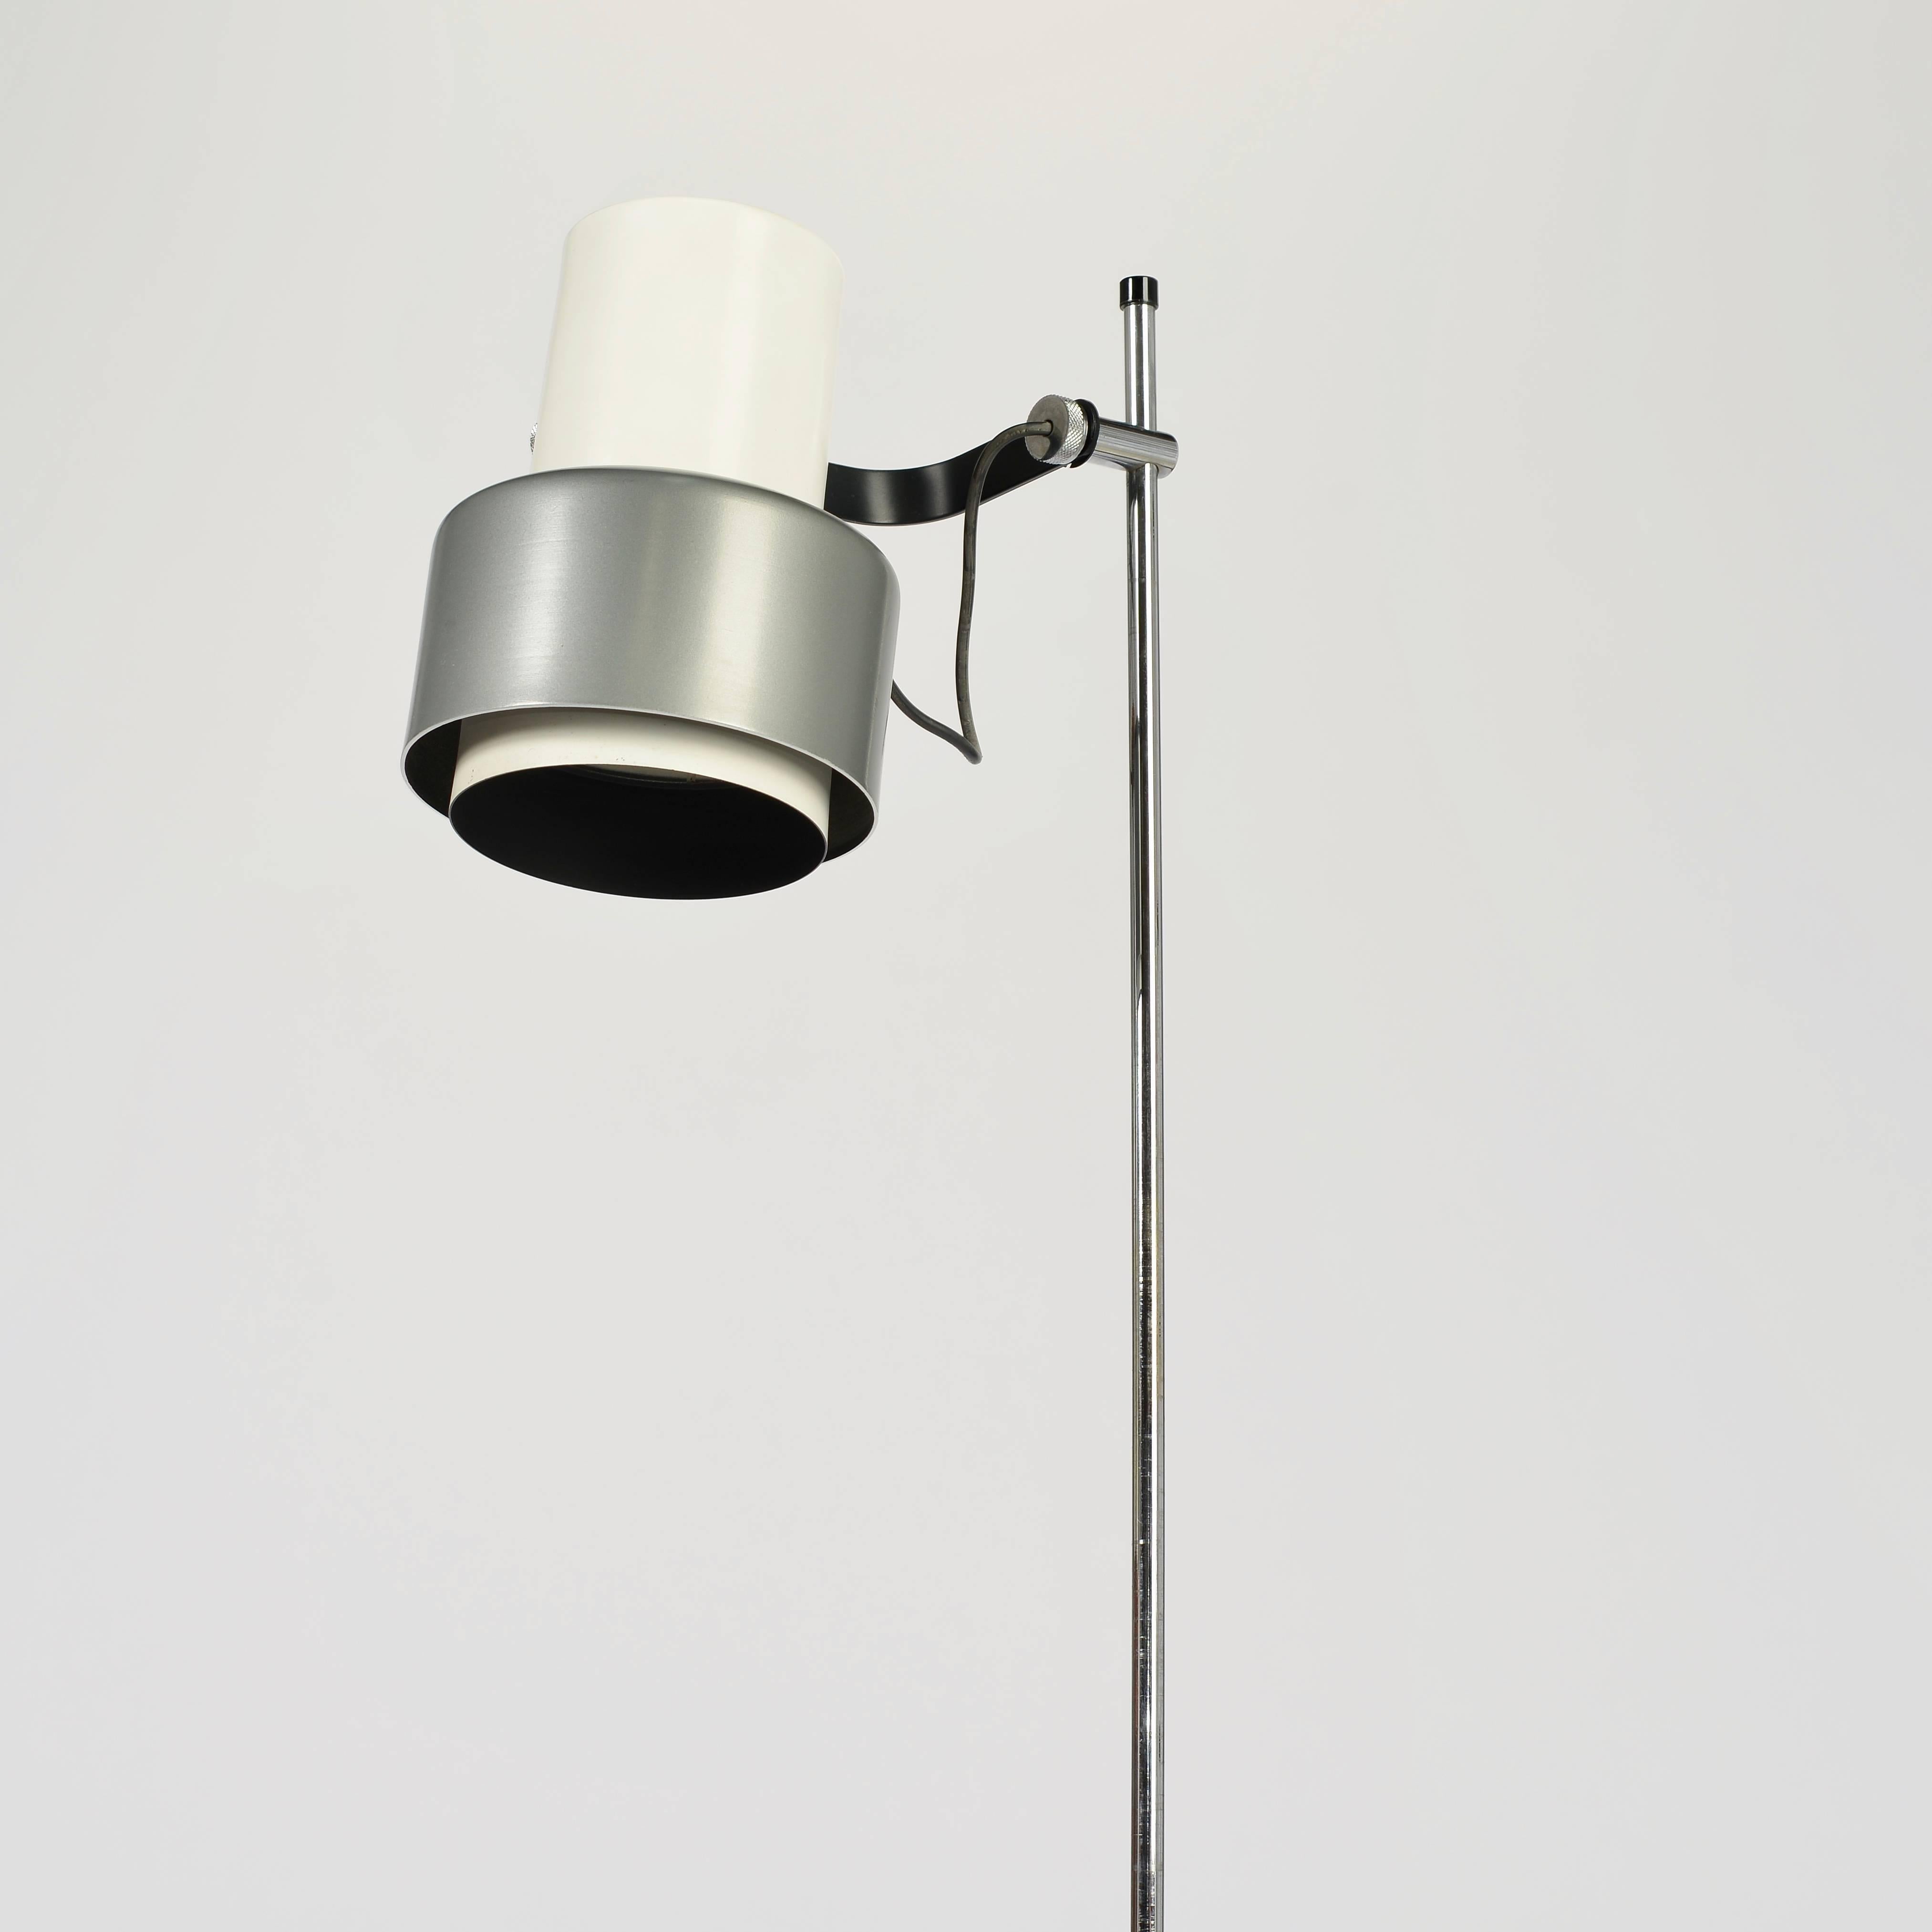 This is an Italian modern lamp by Arredoluce in excellent condition. This piece is fully adjustable.